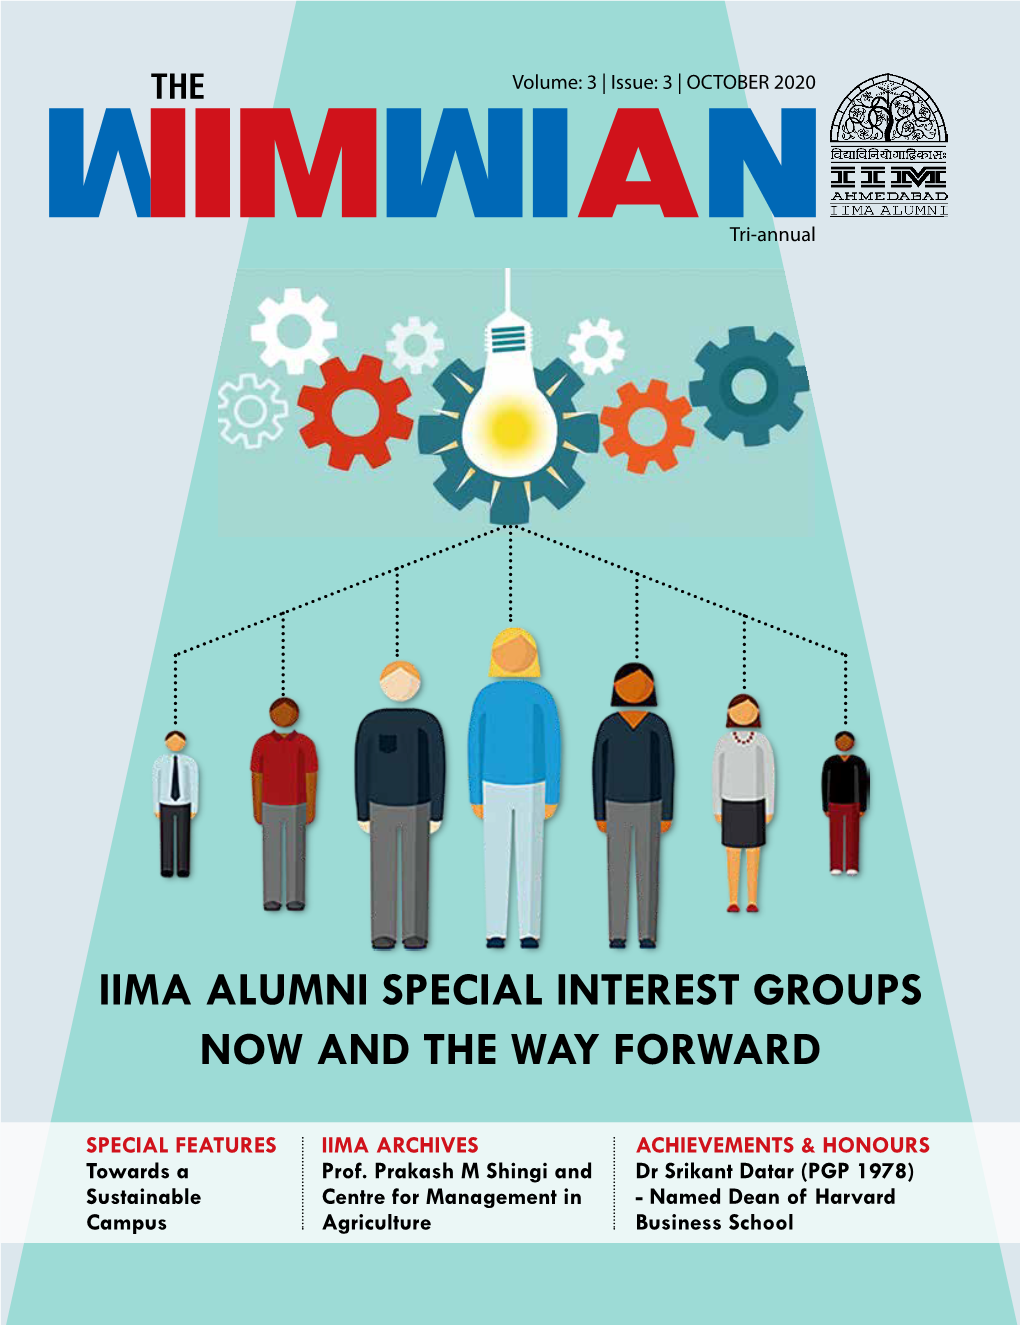 Iima Alumni Special Interest Groups Now and the Way Forward